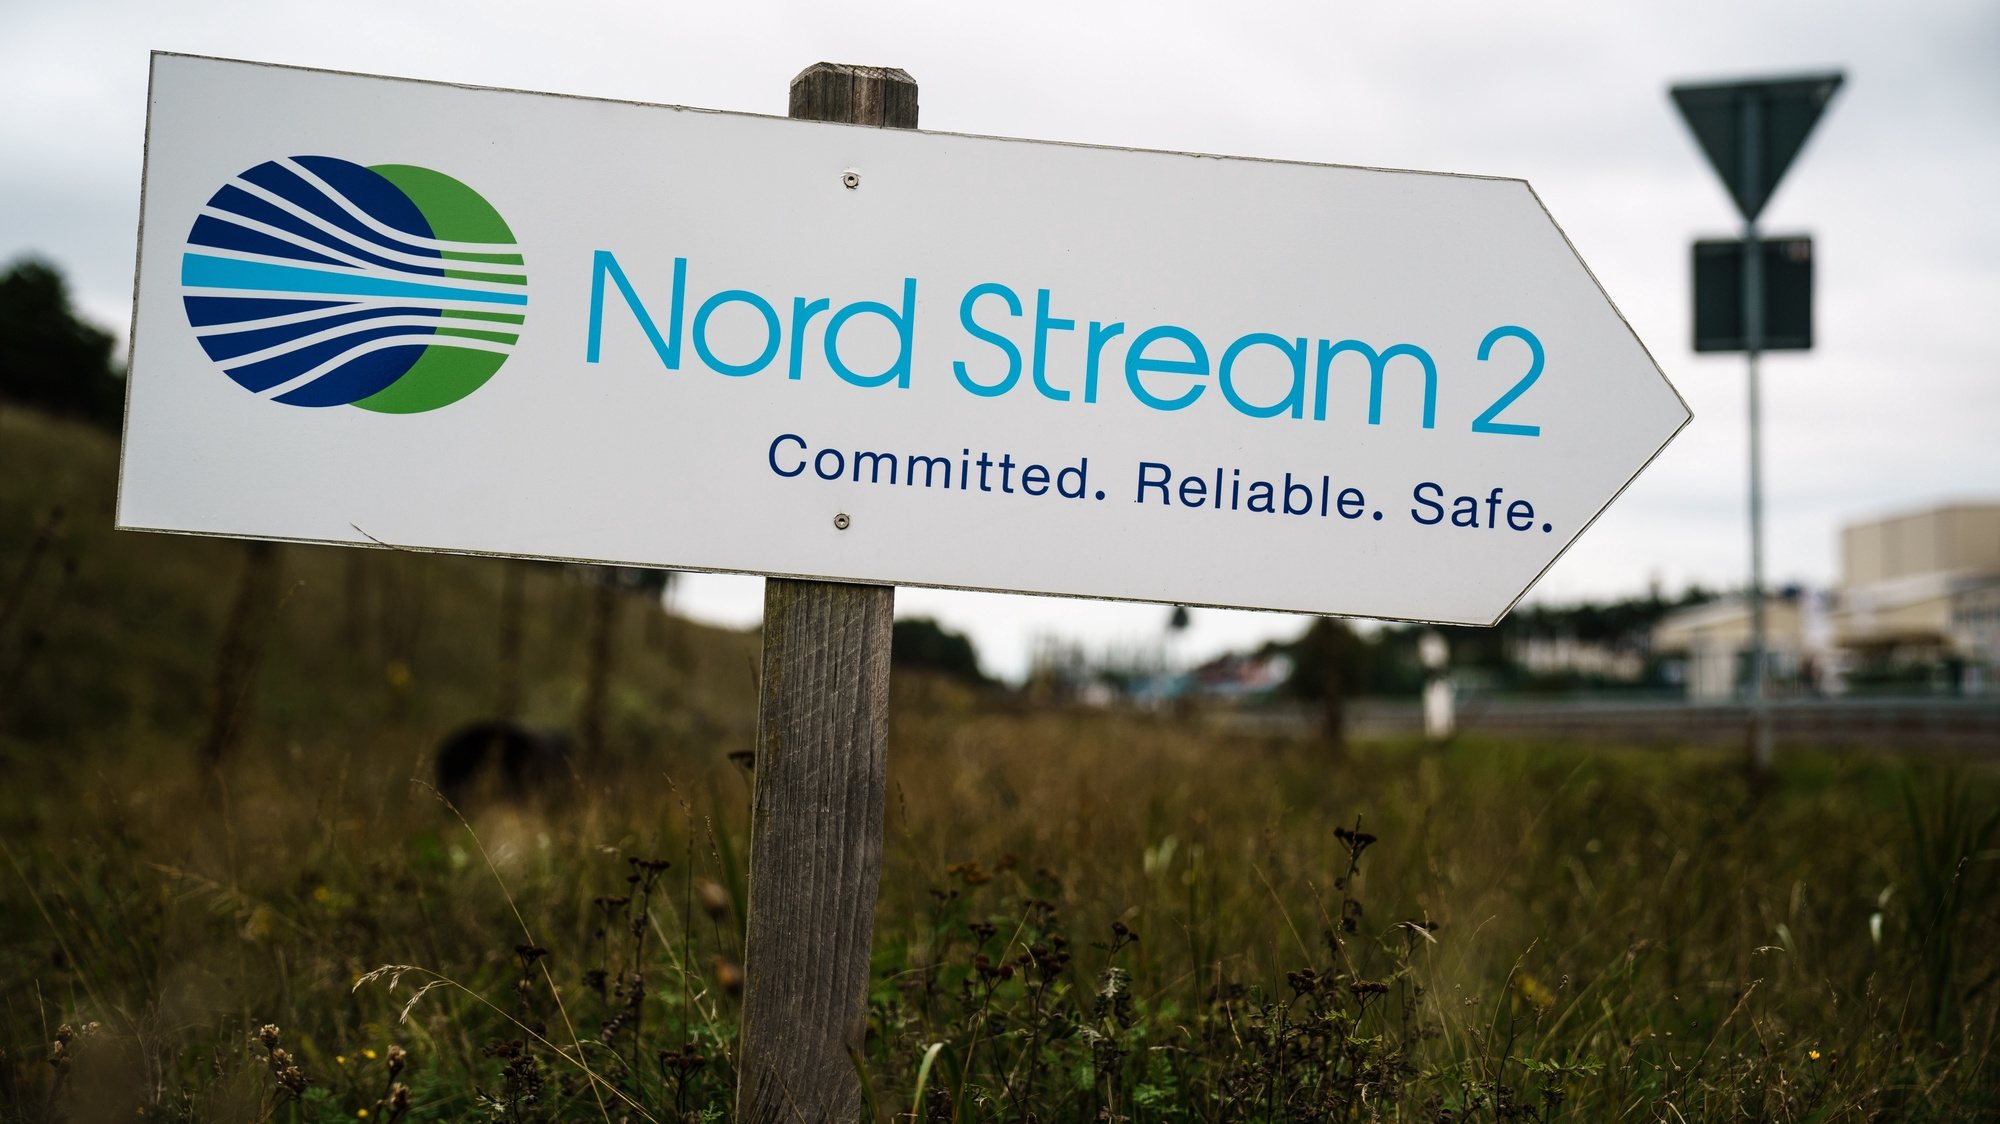 epa08748004 A sign reading ’Nord Stream 2 - Committed. Reliable. Safe.’ picutured near the pipeline landfall facility after a visit of Mecklenburg-Western Pomerania State Premier Manuela Schwesig (not in the picture) to the industrial port and the landfall facility of the joint German-Russian pipeline project Nord Stream 2, in Lubmin, Germany, 15 October 2020. The politically controversial pipeline project was put into question in response to the alleged poisoning of Kreml critic Alexei Navalny. Schwesig wants to save the gas pipeline that she regards an important infrastructure project.  EPA/CLEMENS BILAN